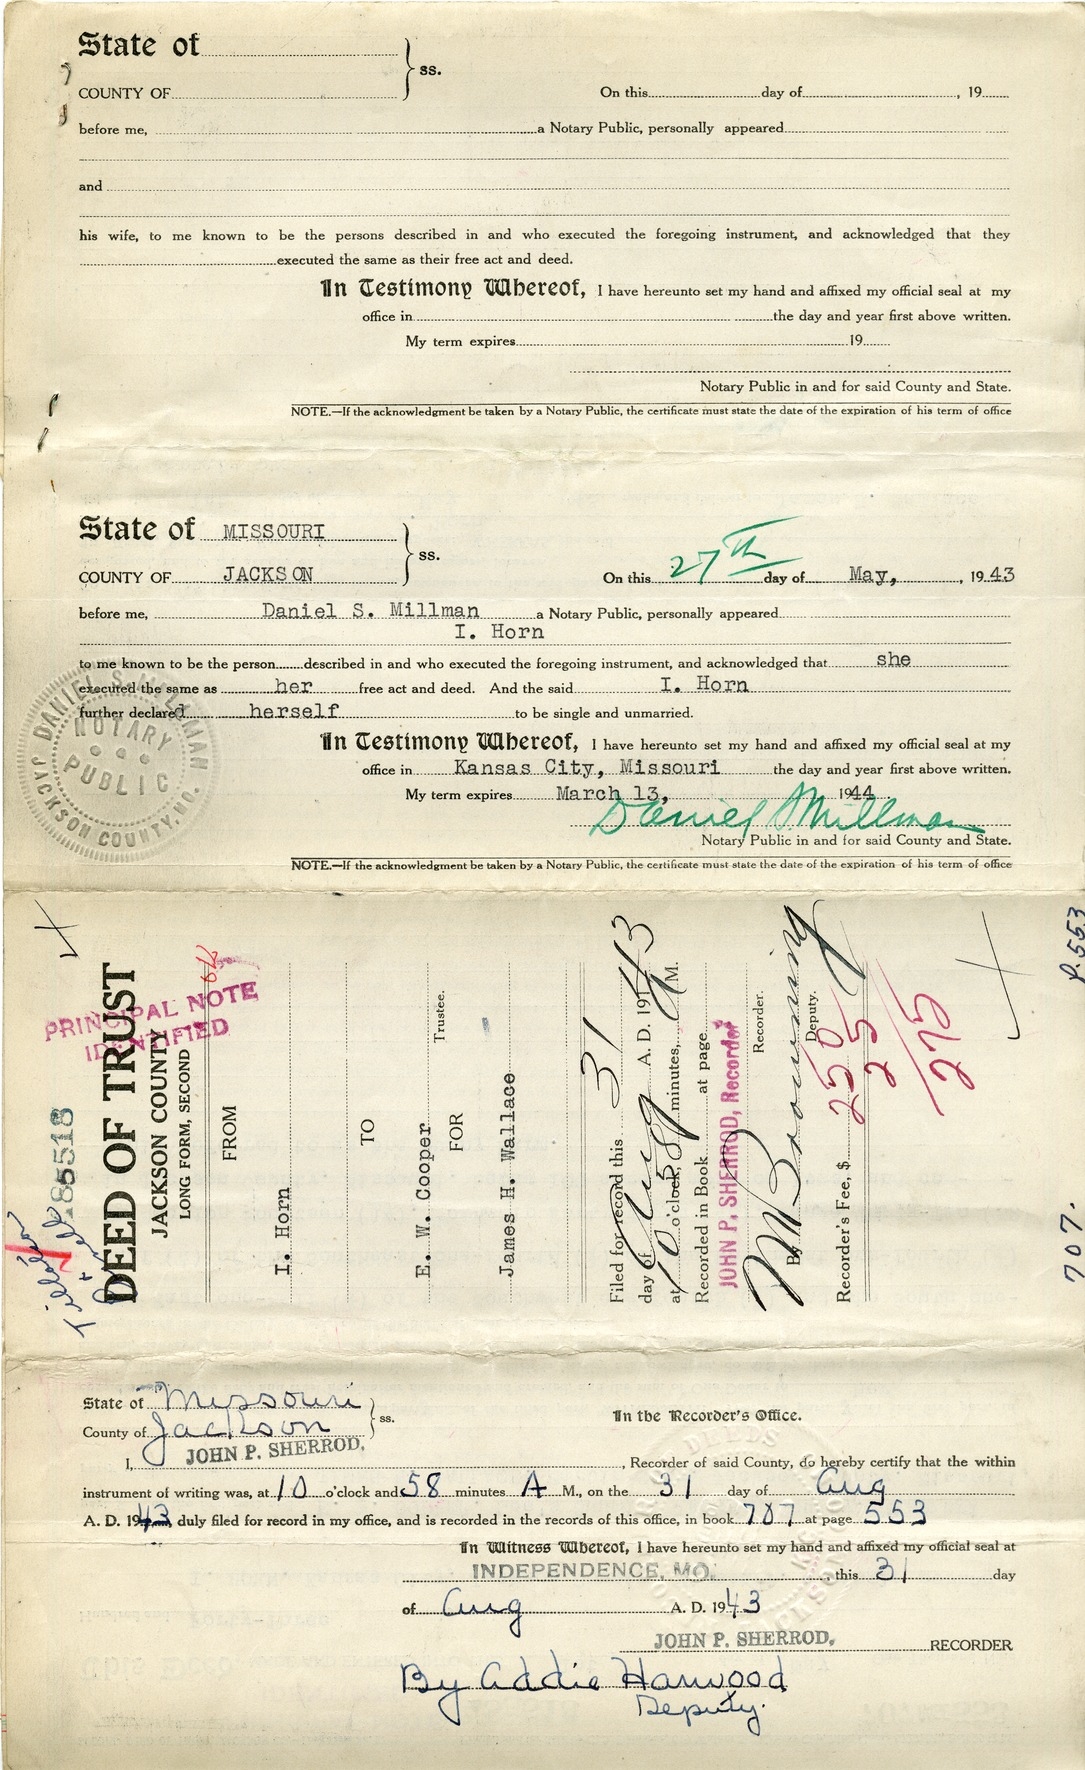 Deed of Trust from I. Horn to E. W. Cooper for James H. Wallace